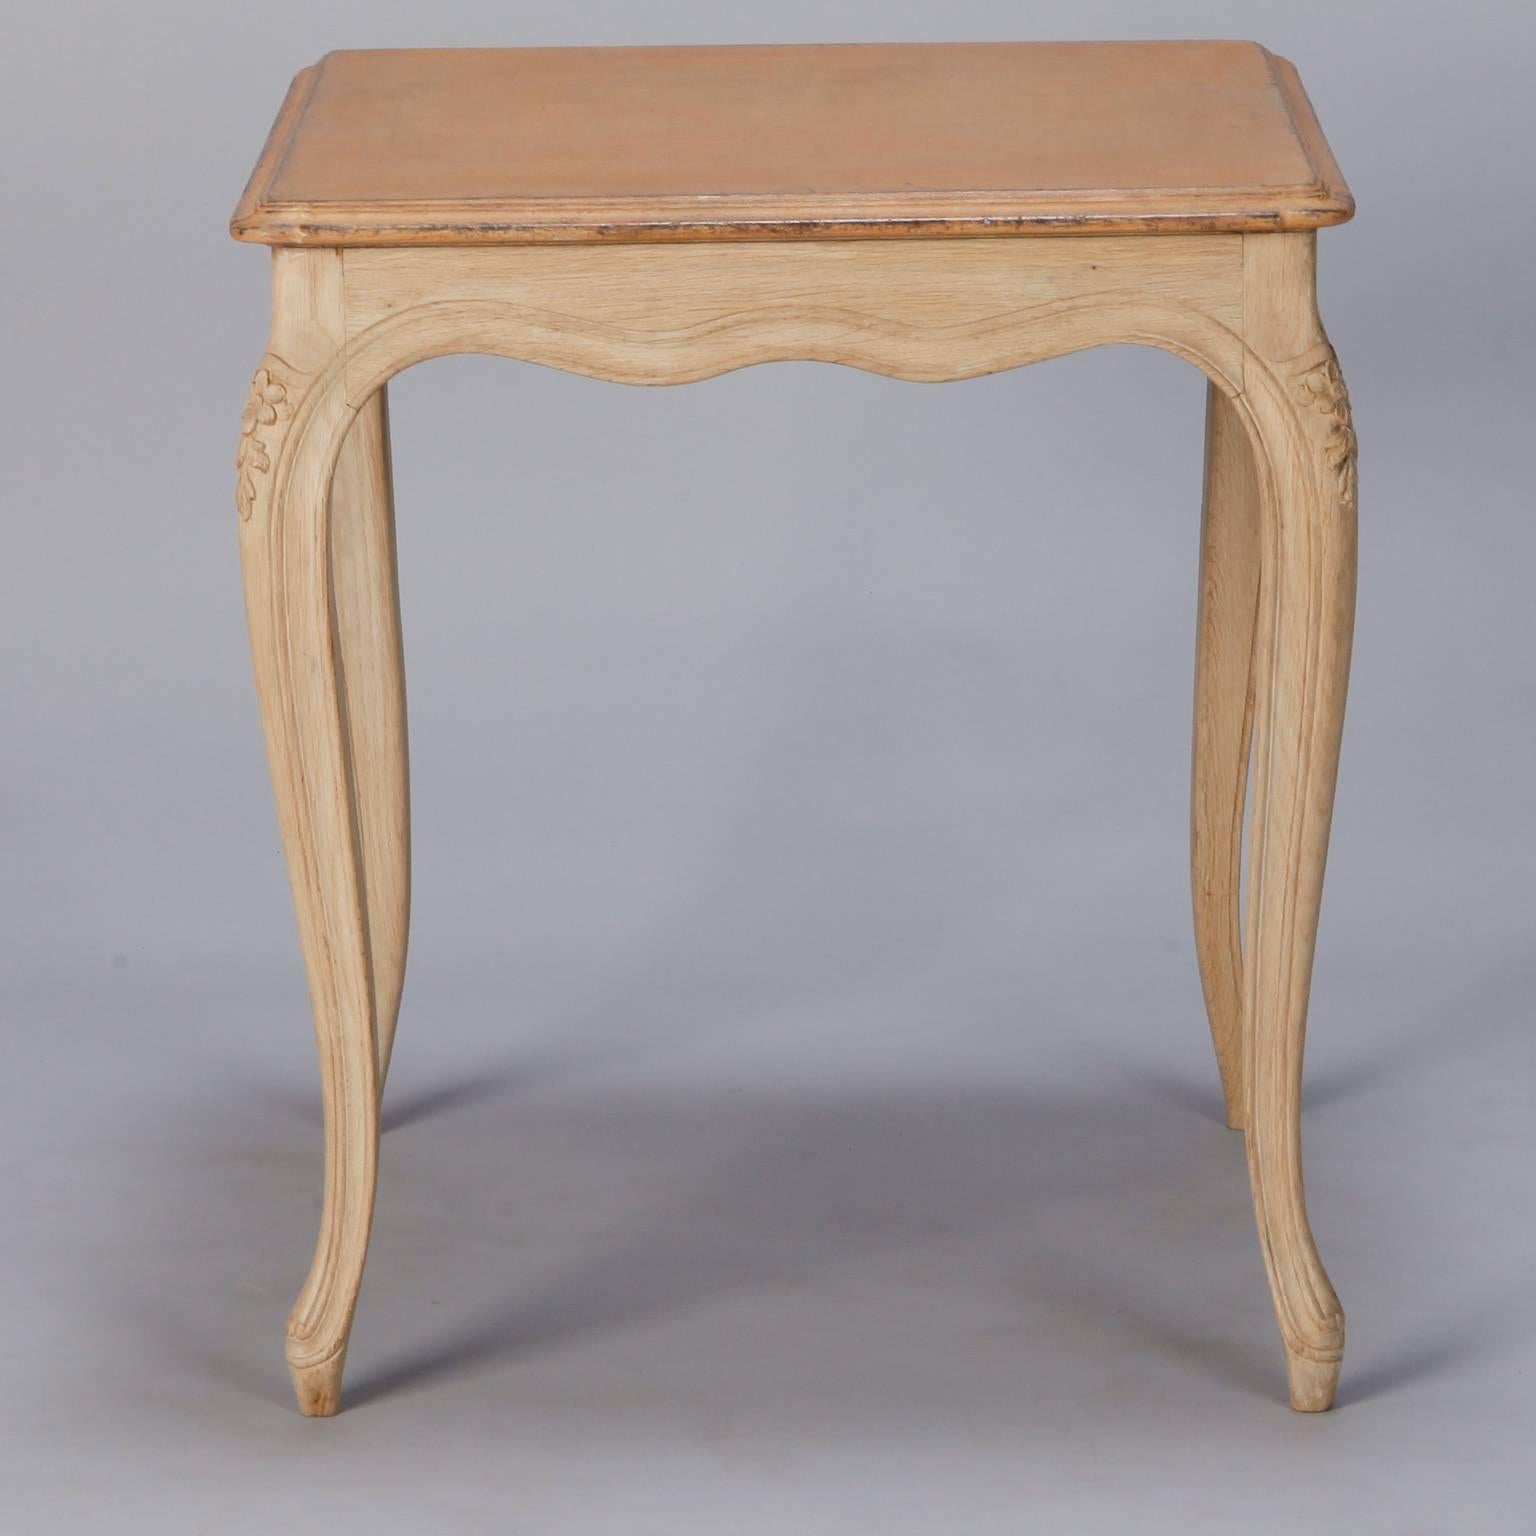 French square side table with painted top and contrasting bleached wood legs and apron with carved floral details, circa 1930s.

     